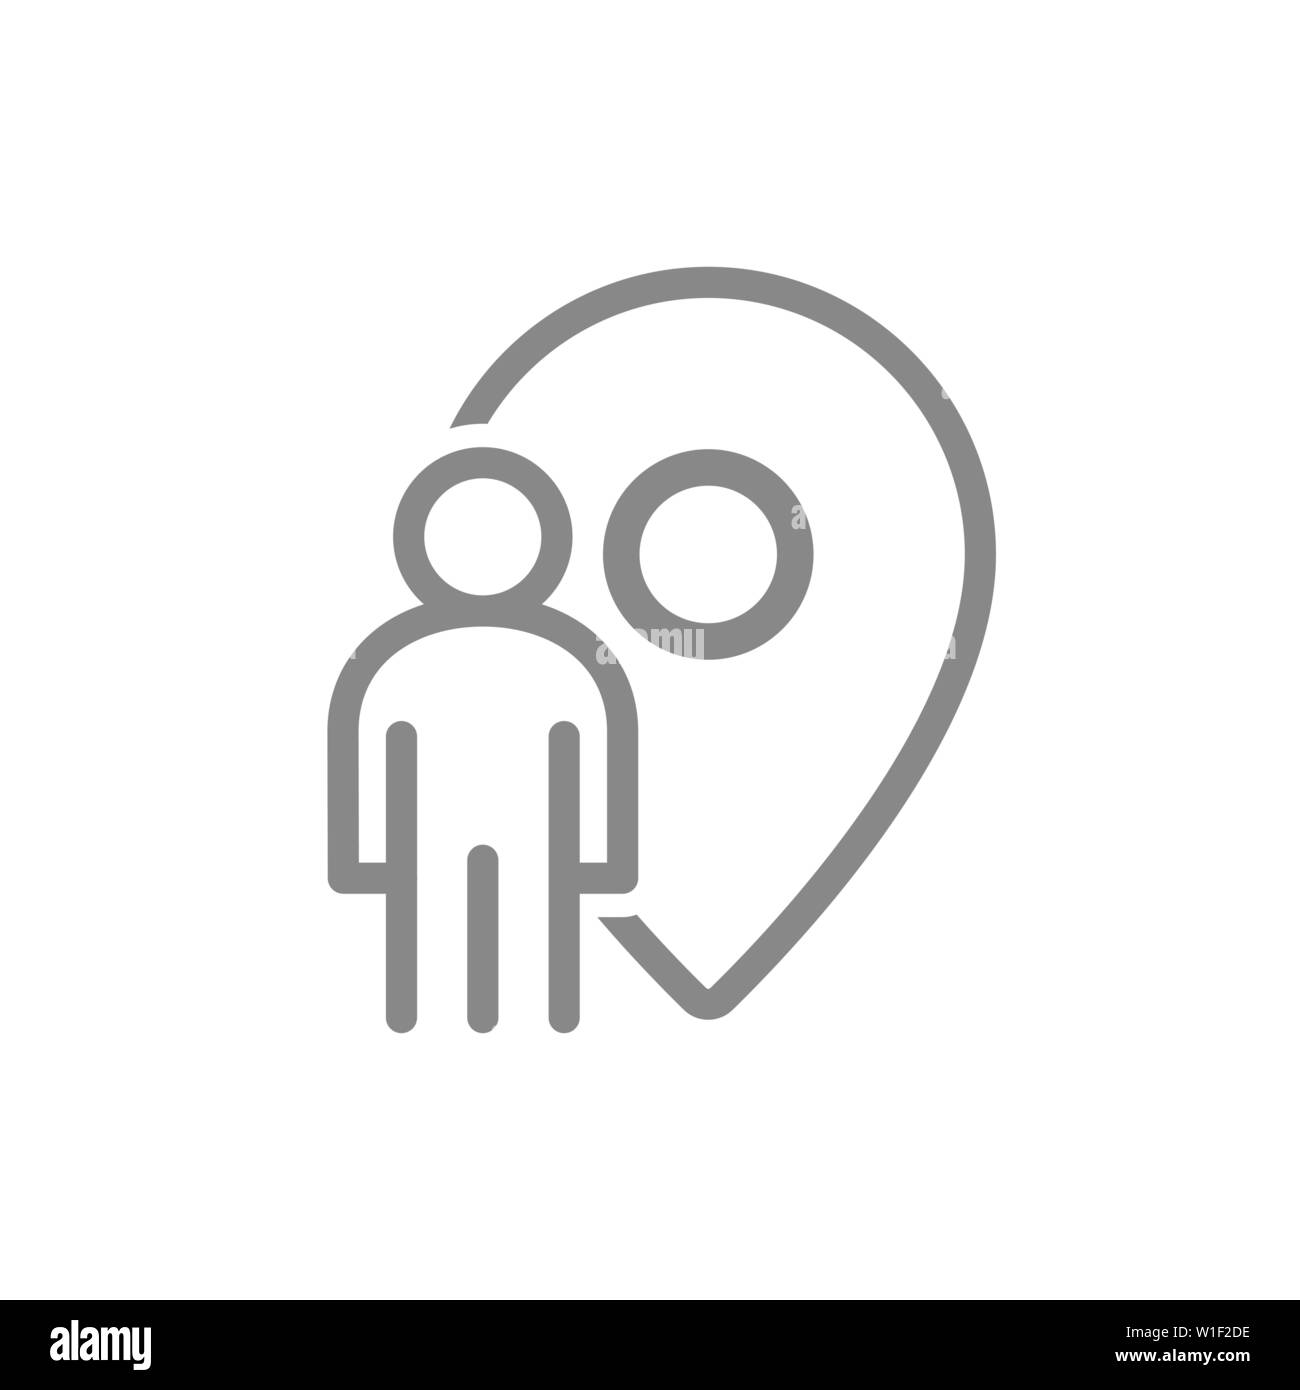 Location pin with man line icon. City navigation symbol and sign Stock Vector